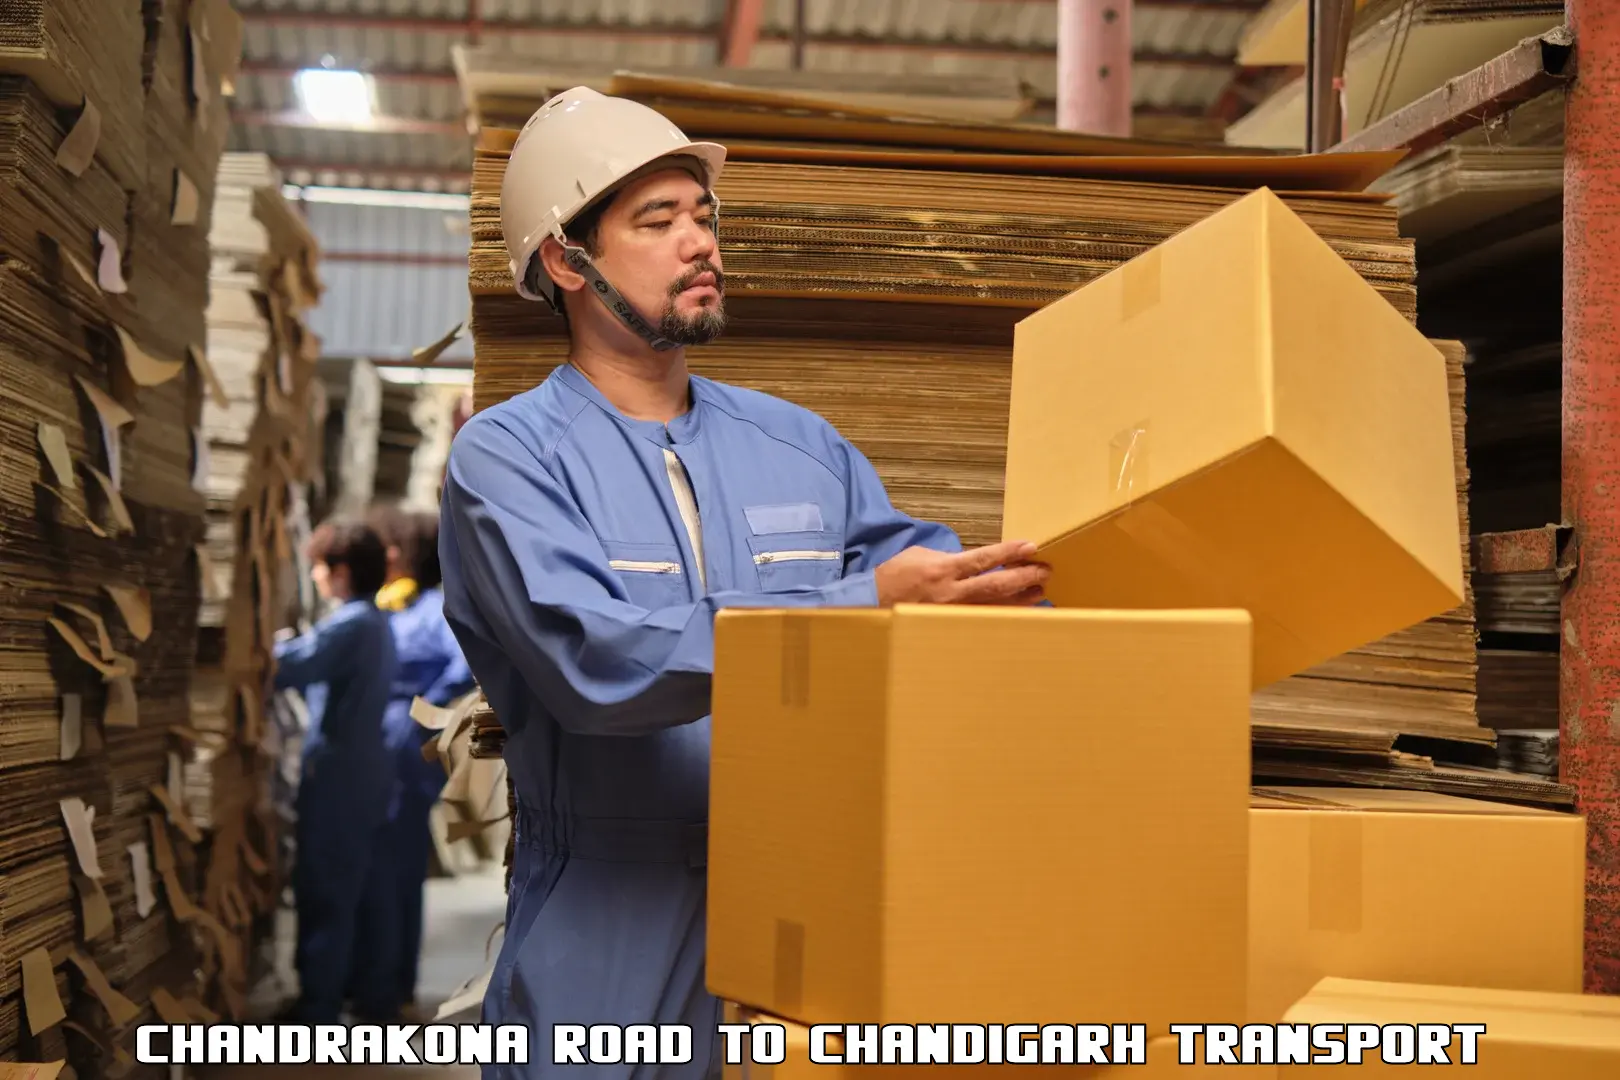 Part load transport service in India Chandrakona Road to Chandigarh